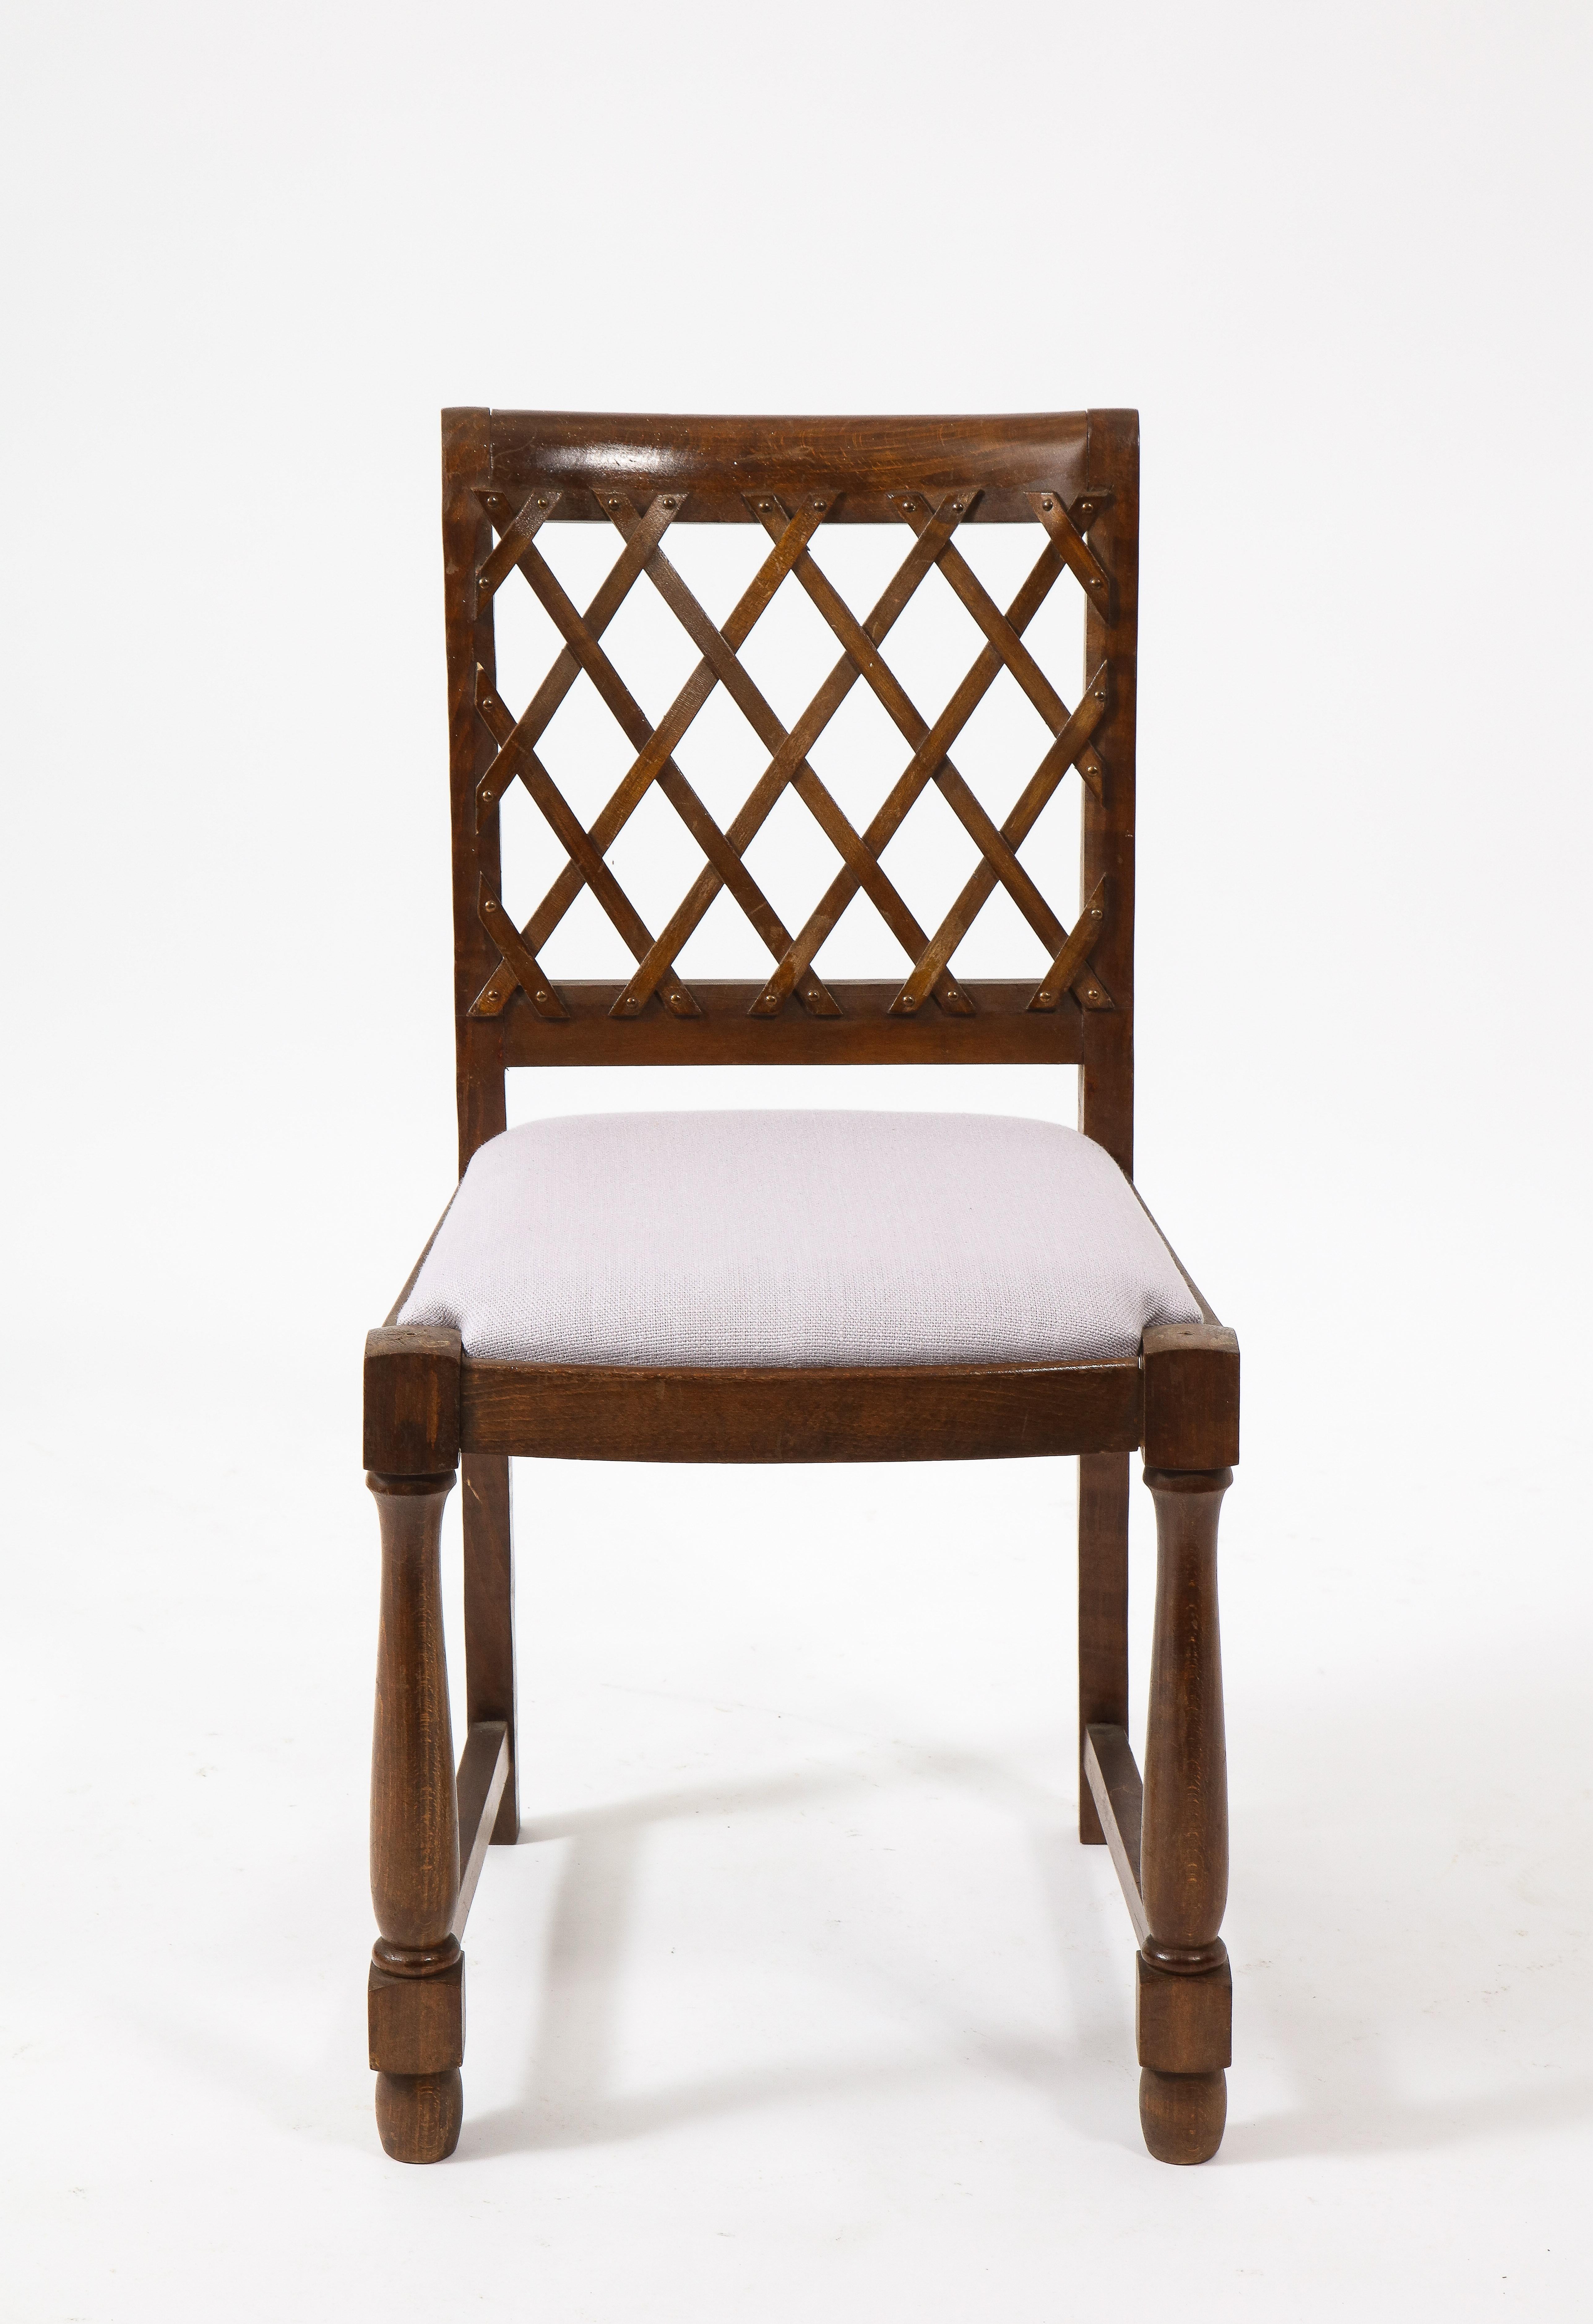 A set of elegantly carved oak side chairs with a lattice back.